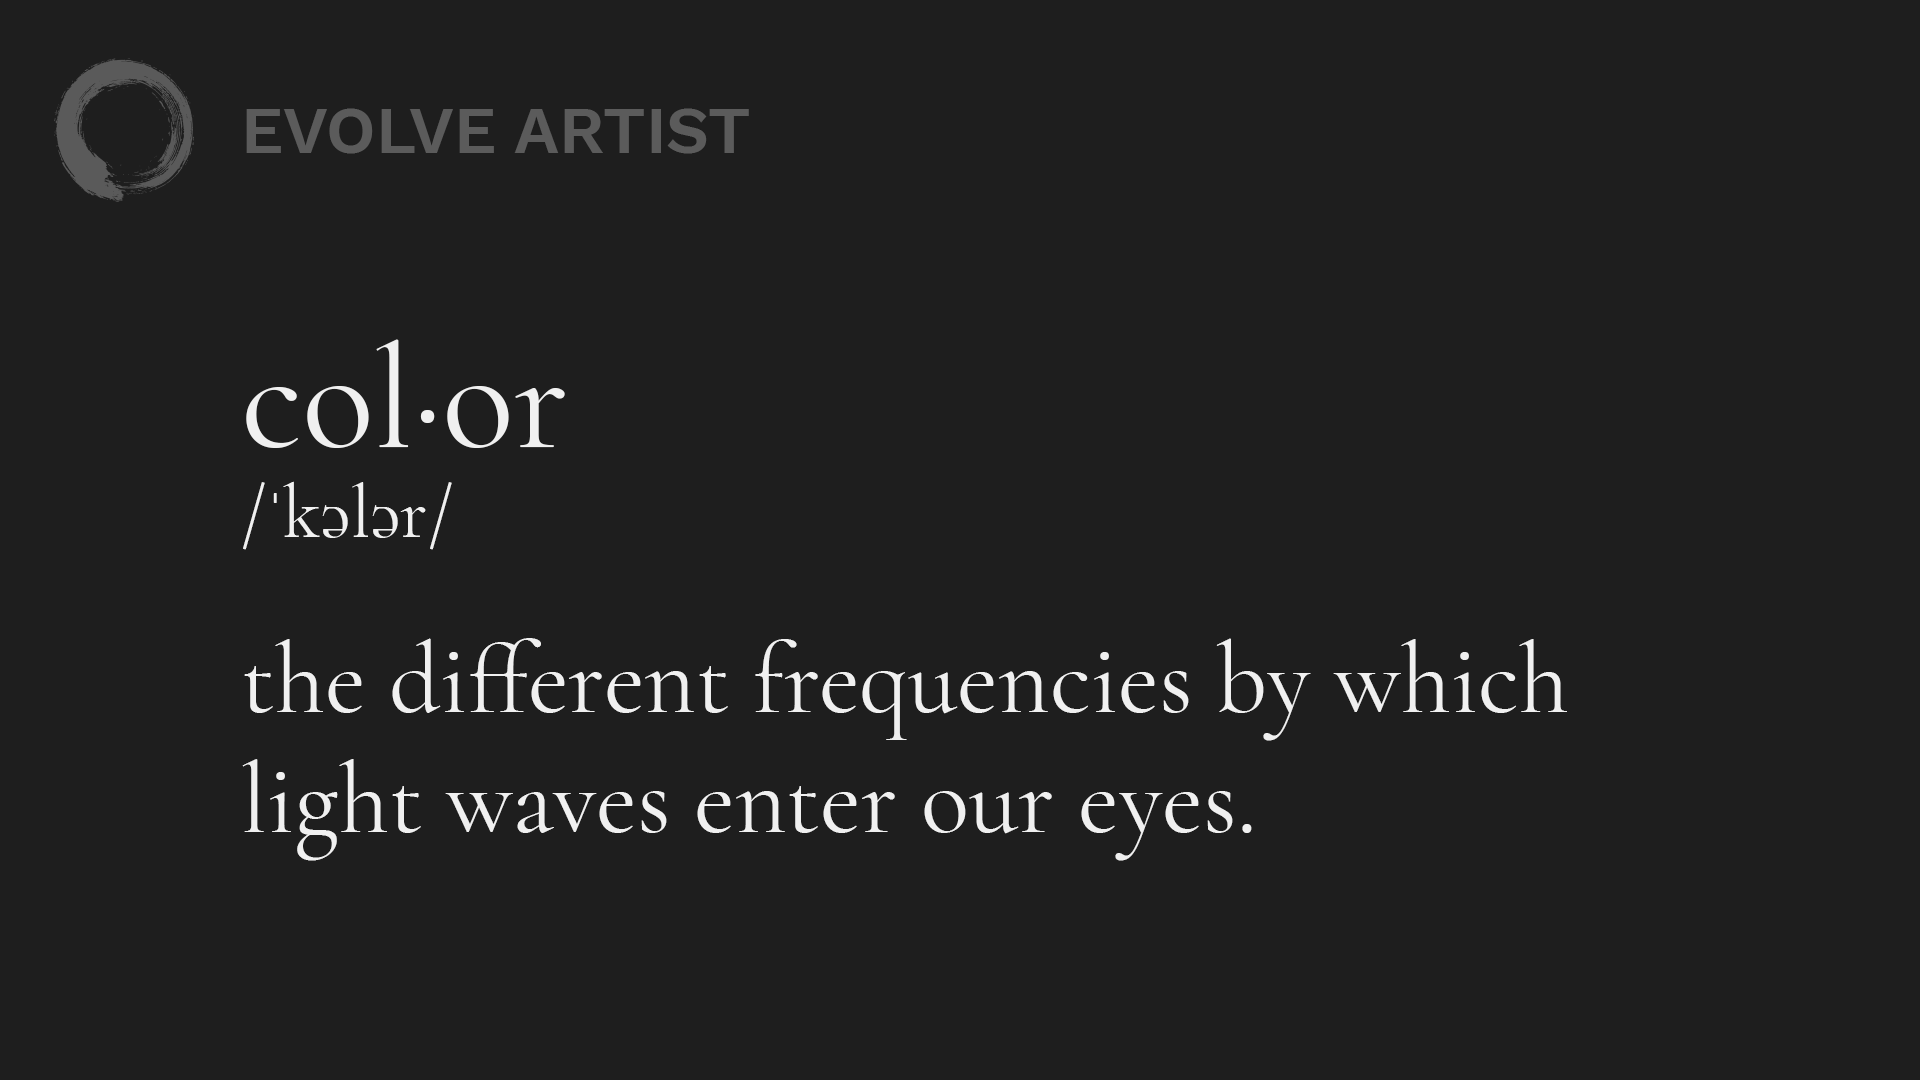 Color is the different frequencies by which light waves enter our eyes.